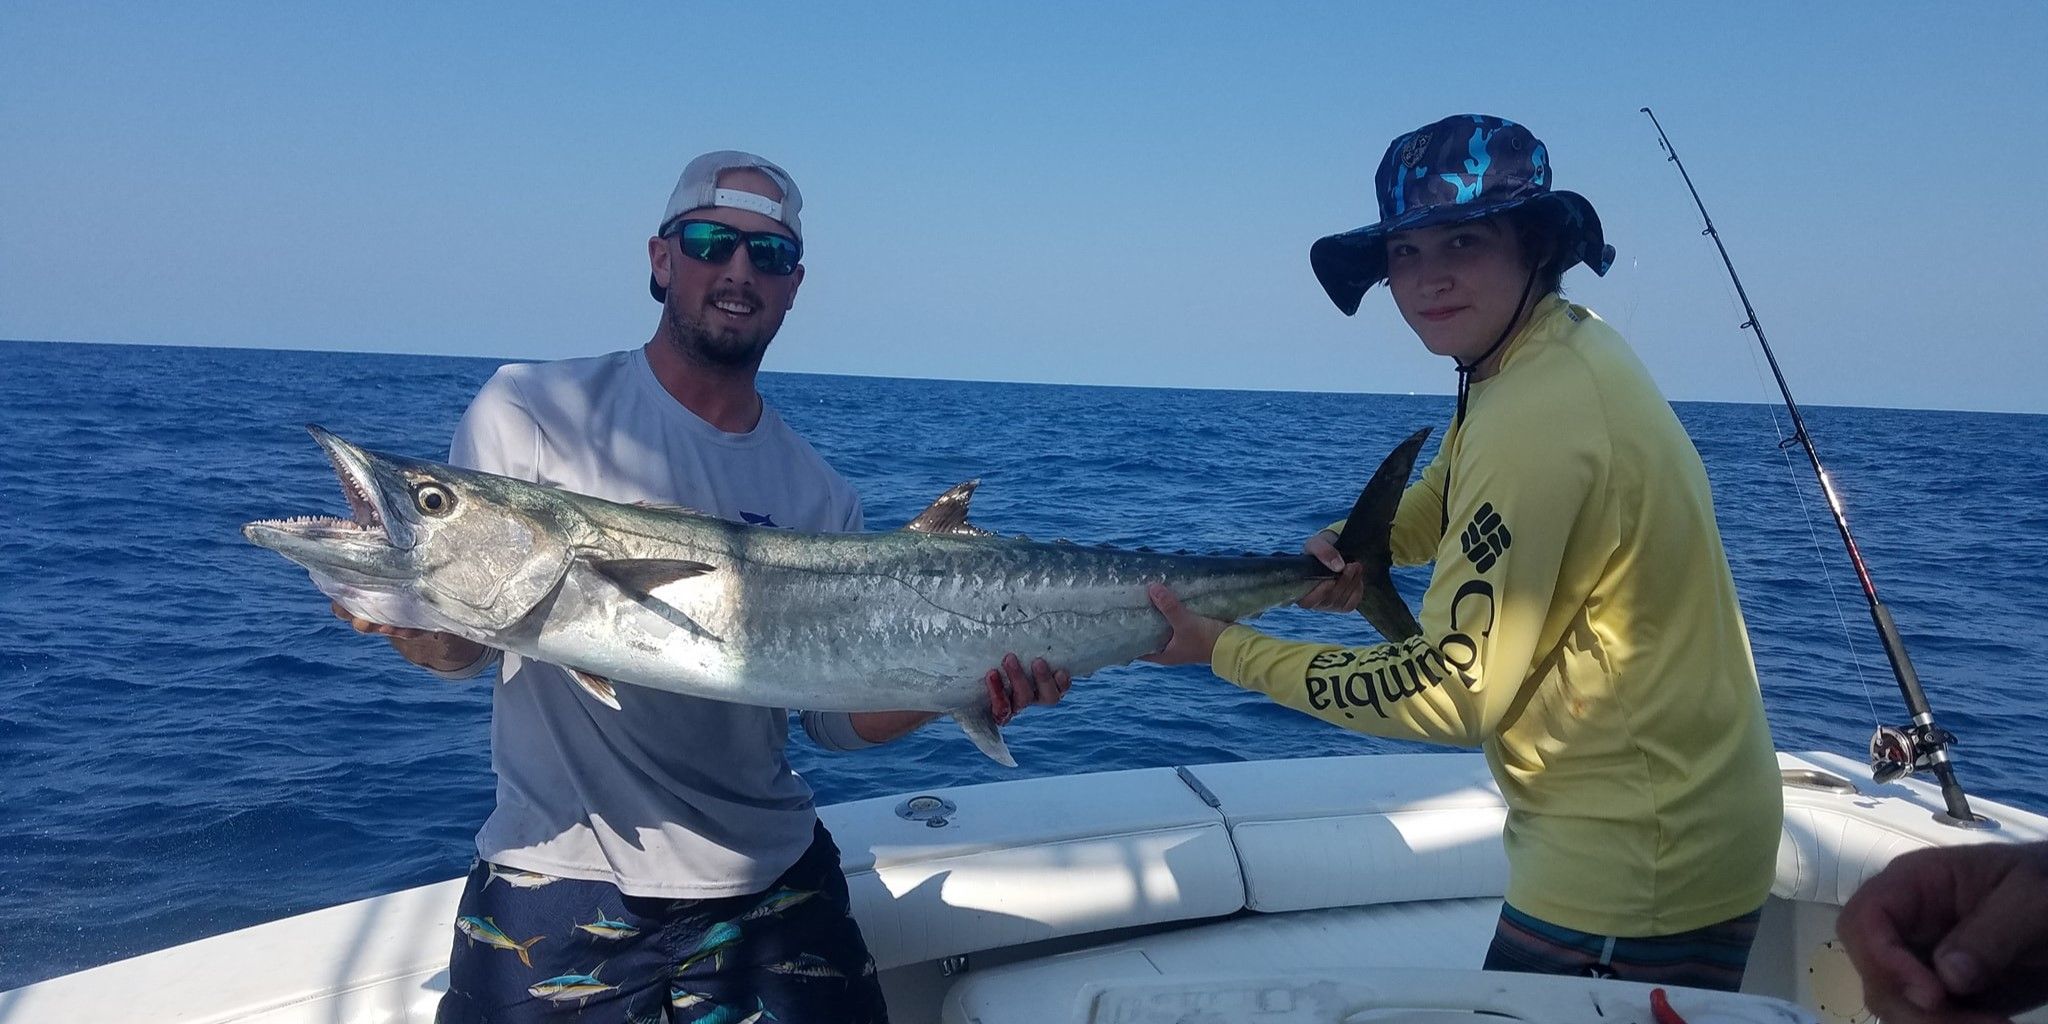 Second Sport Charters Fishing Charter Carolina Beach | Extended Day Bottom Fishing Trip fishing Offshore